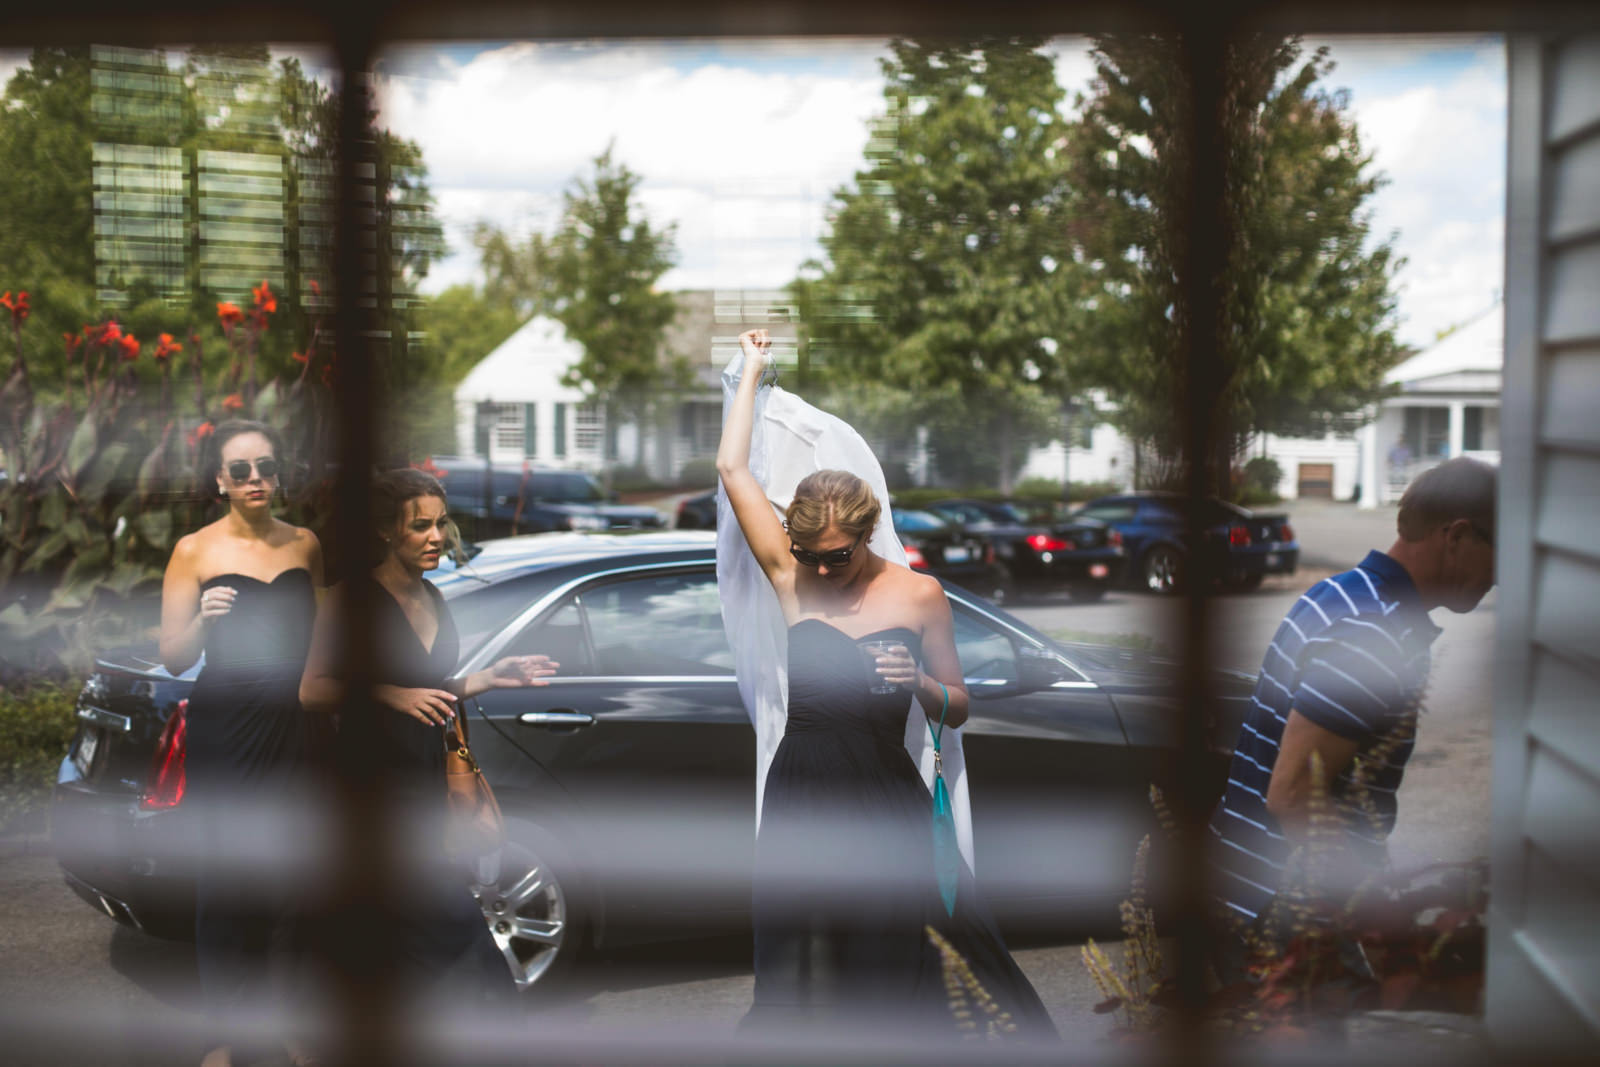 11 dress arrives at conway farms - Stephanie + Zack // Conway Farms Chicago Wedding Photographers